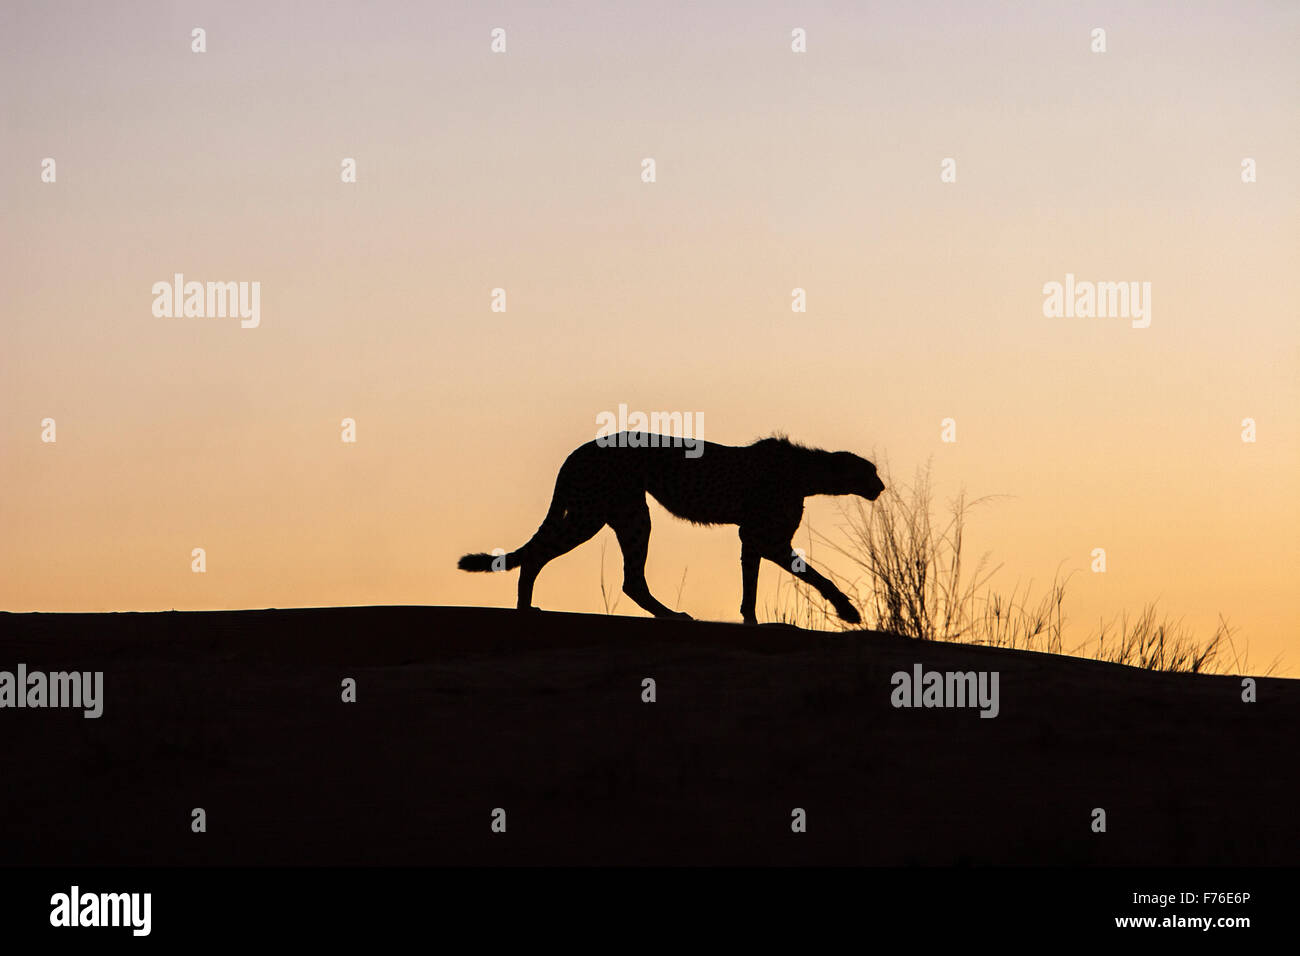 A cheetah silhouetted on top of a dune in the Kgalagadi Transfrontier Park Stock Photo